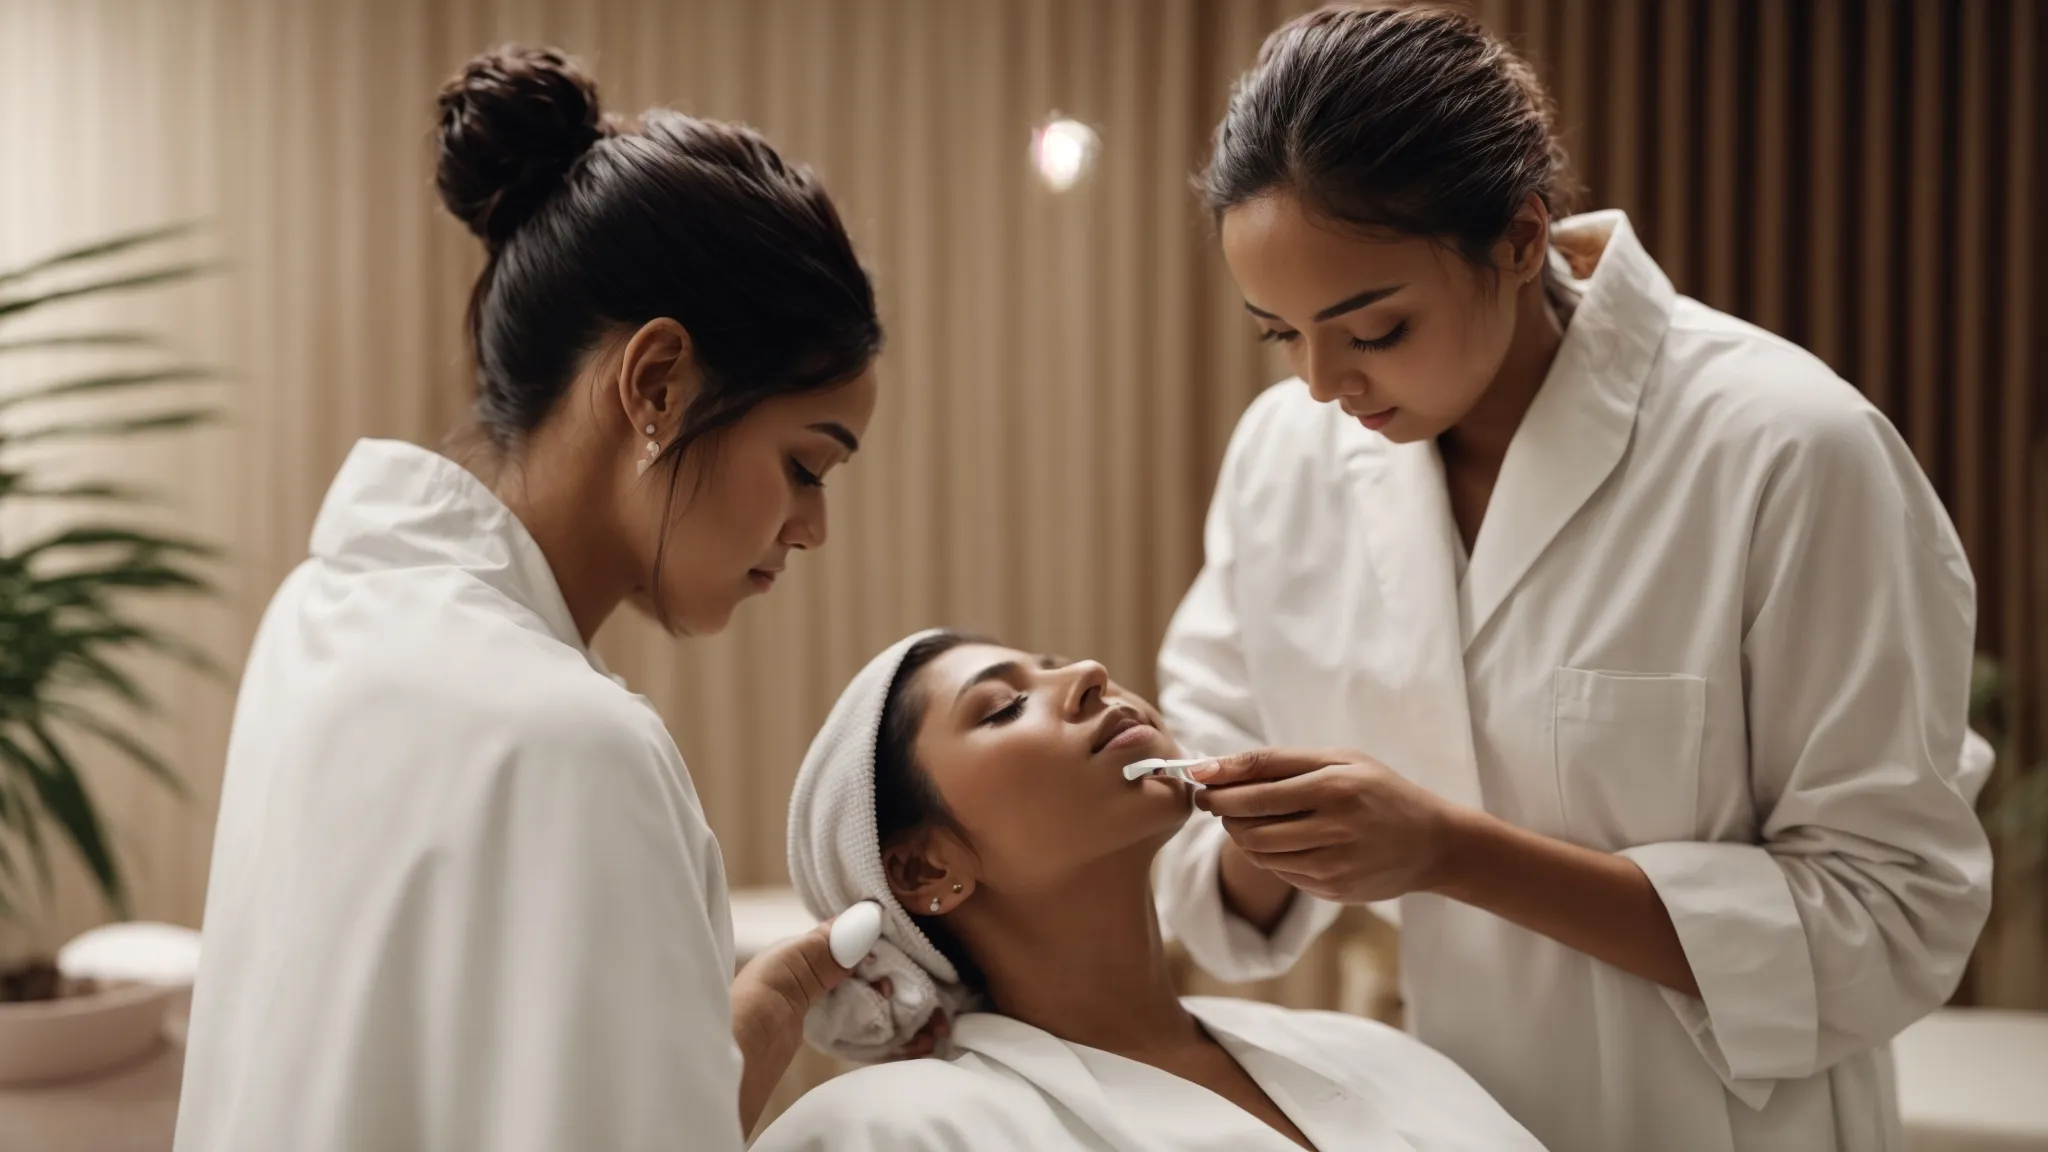 a professional applying a treatment on a person's face in a serene spa setting.